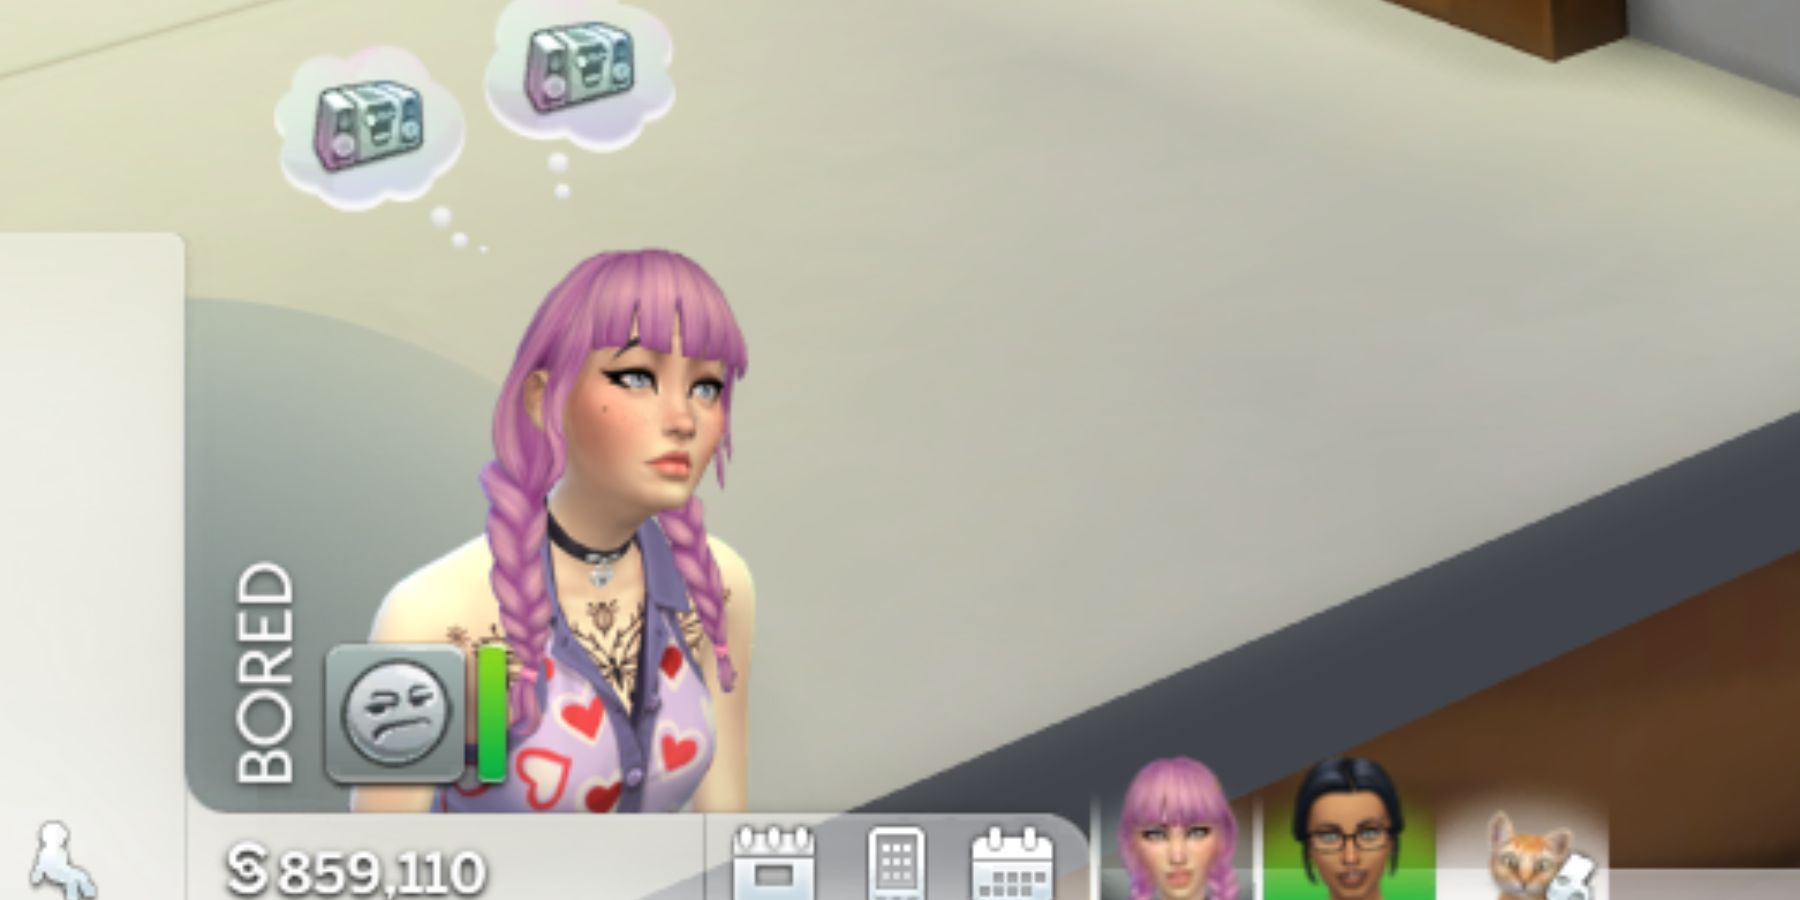 The Sims 4 Bored